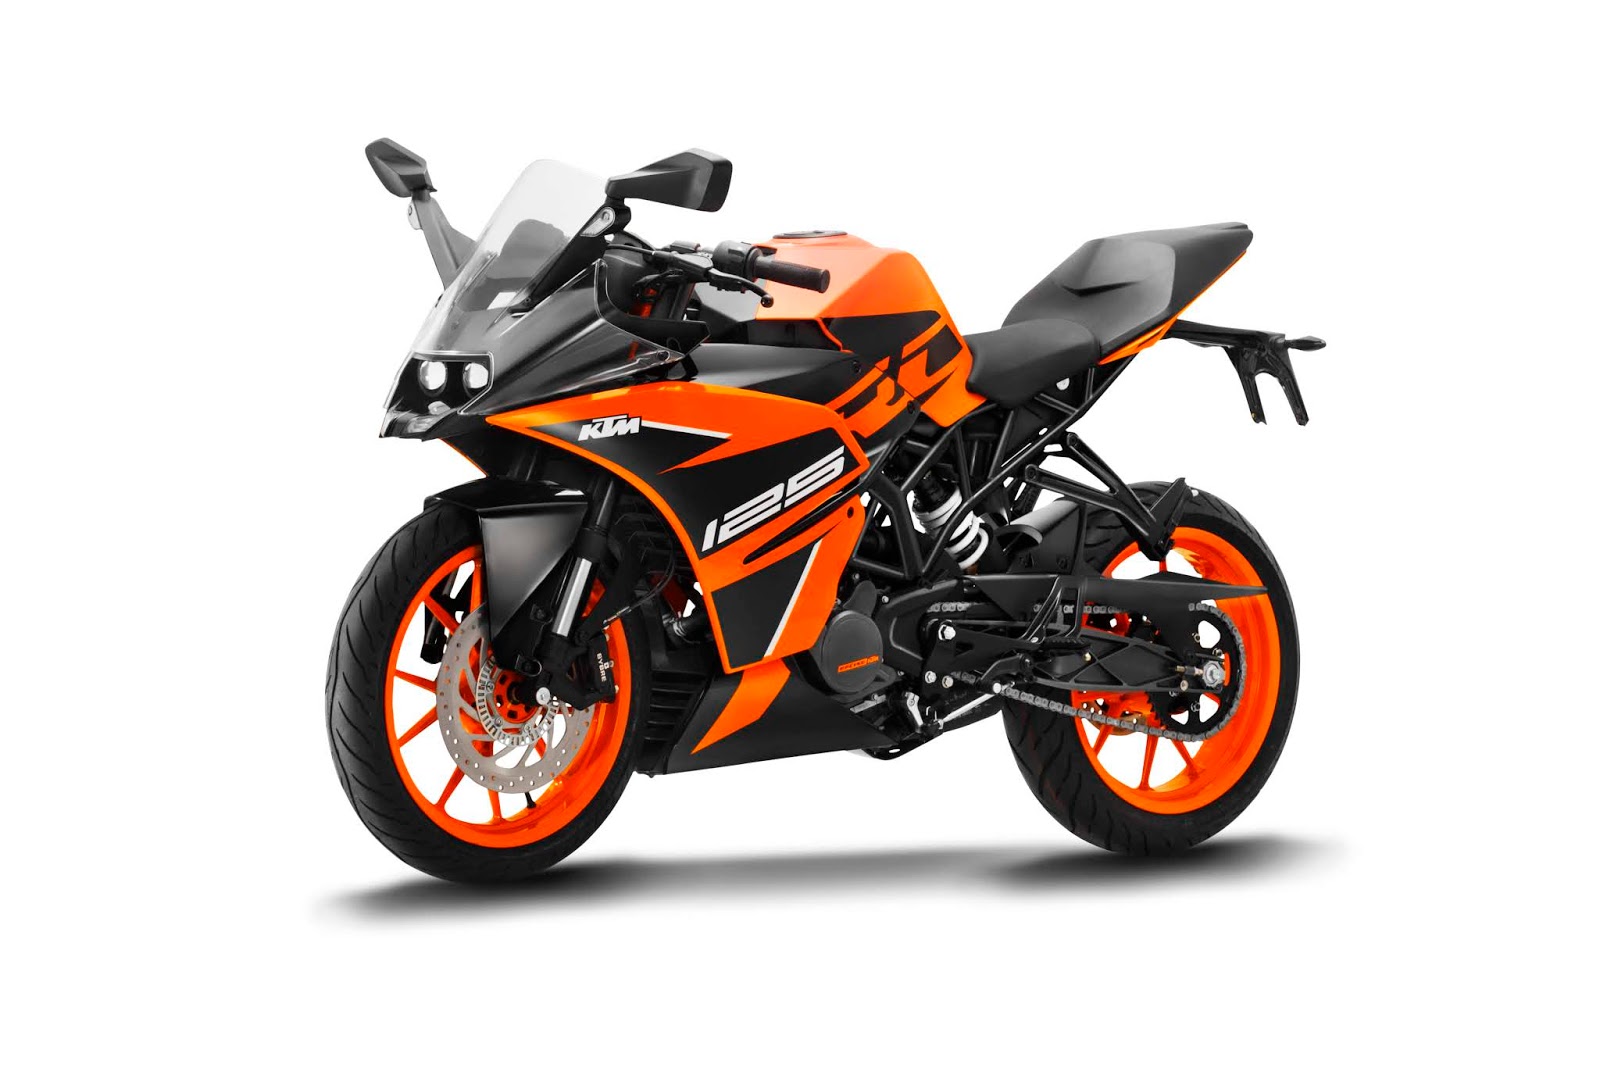 TOP NEWS UPDATES: KTM launches RC 125 ABS in India